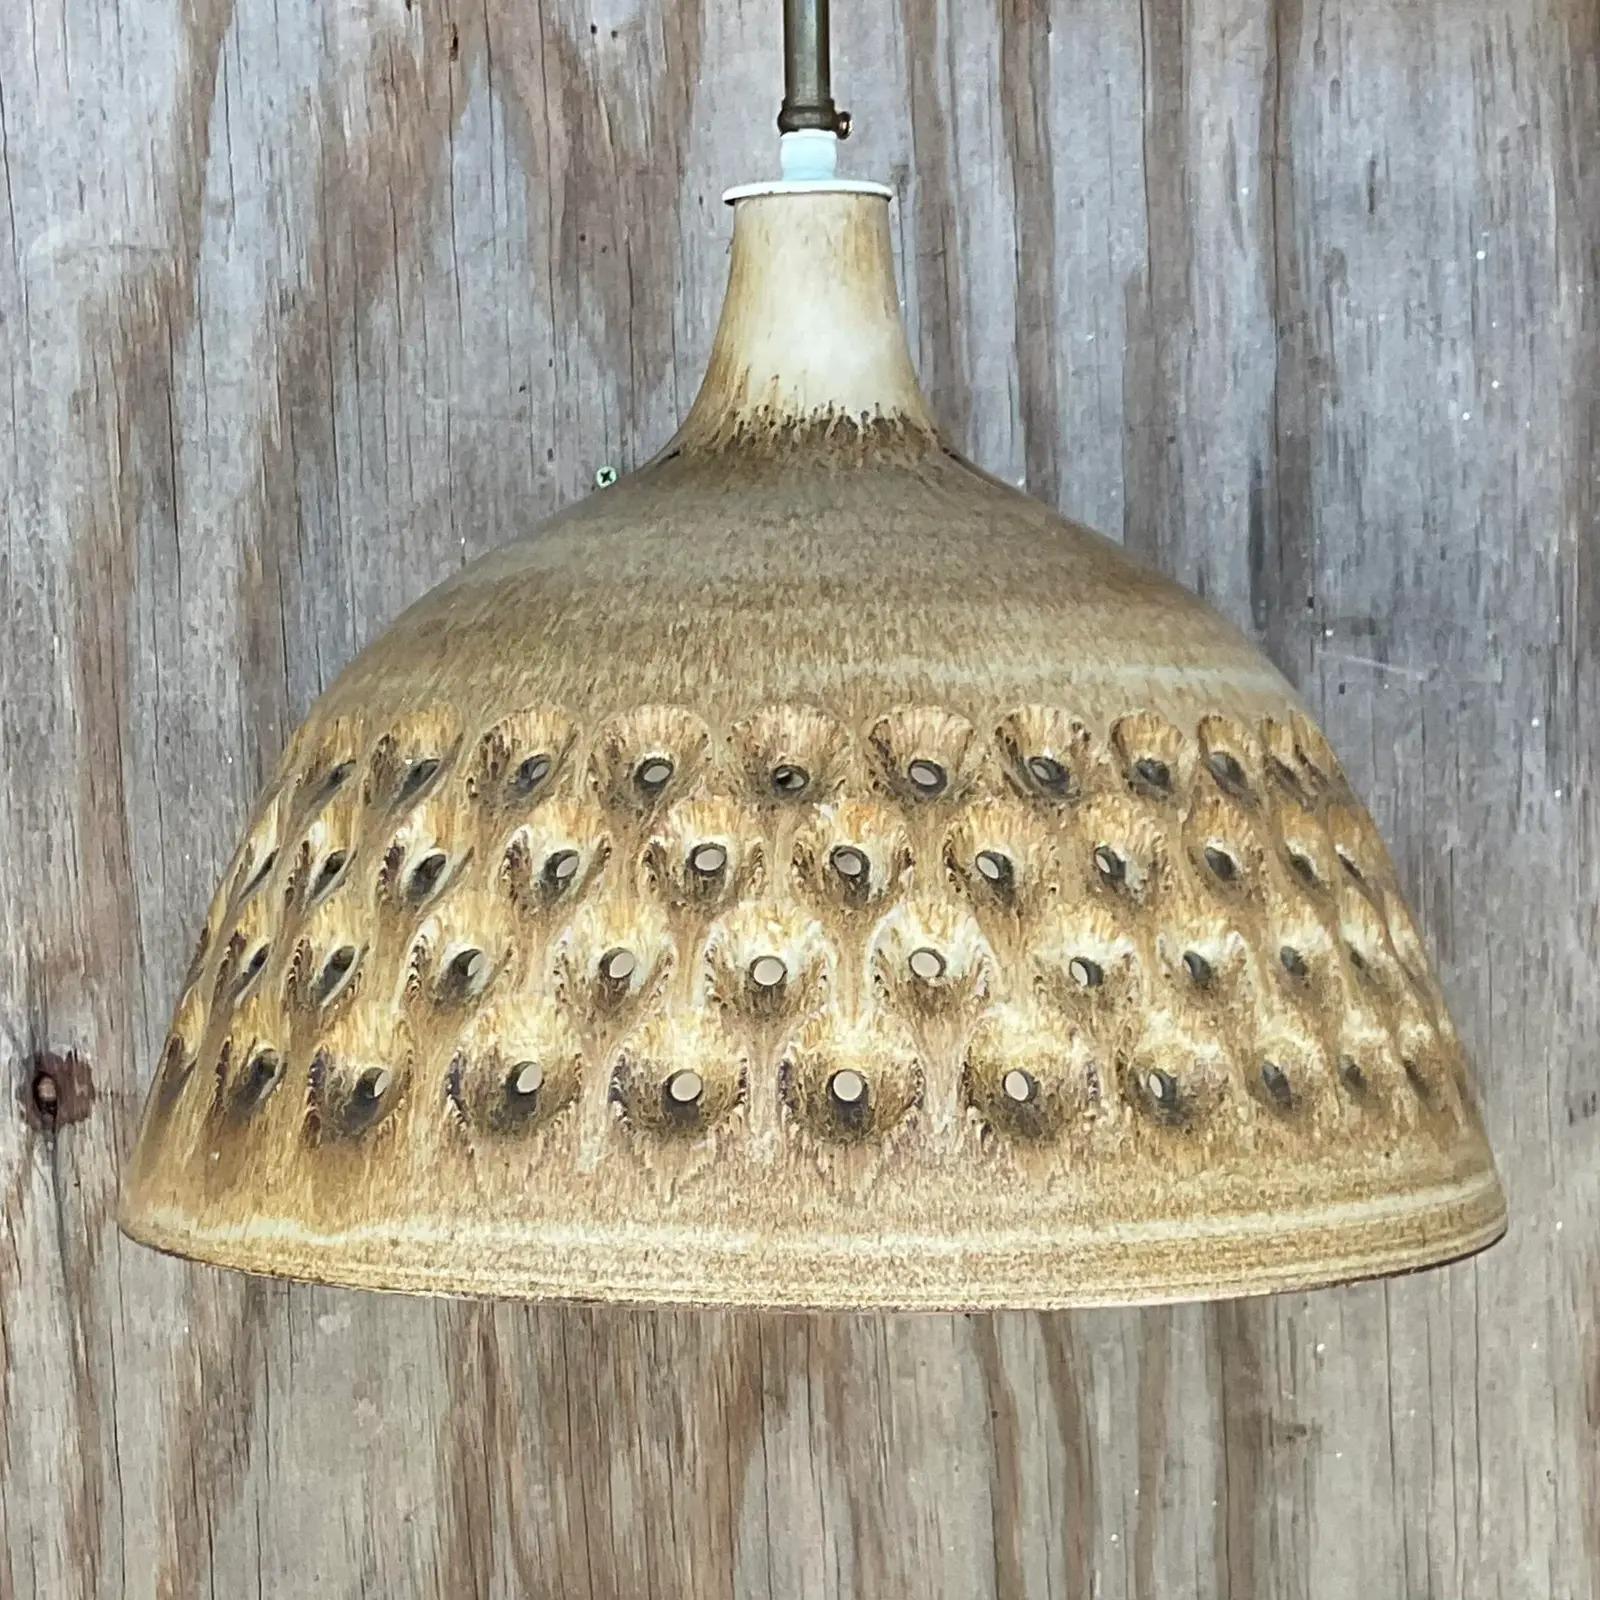 Fabulous vintage Matte glazed pottery chandelier. Made by the iconic Leo Rosen of Design Technics. Beautiful neutral colors and perforated design. Acquired from a Palm Beach estate.